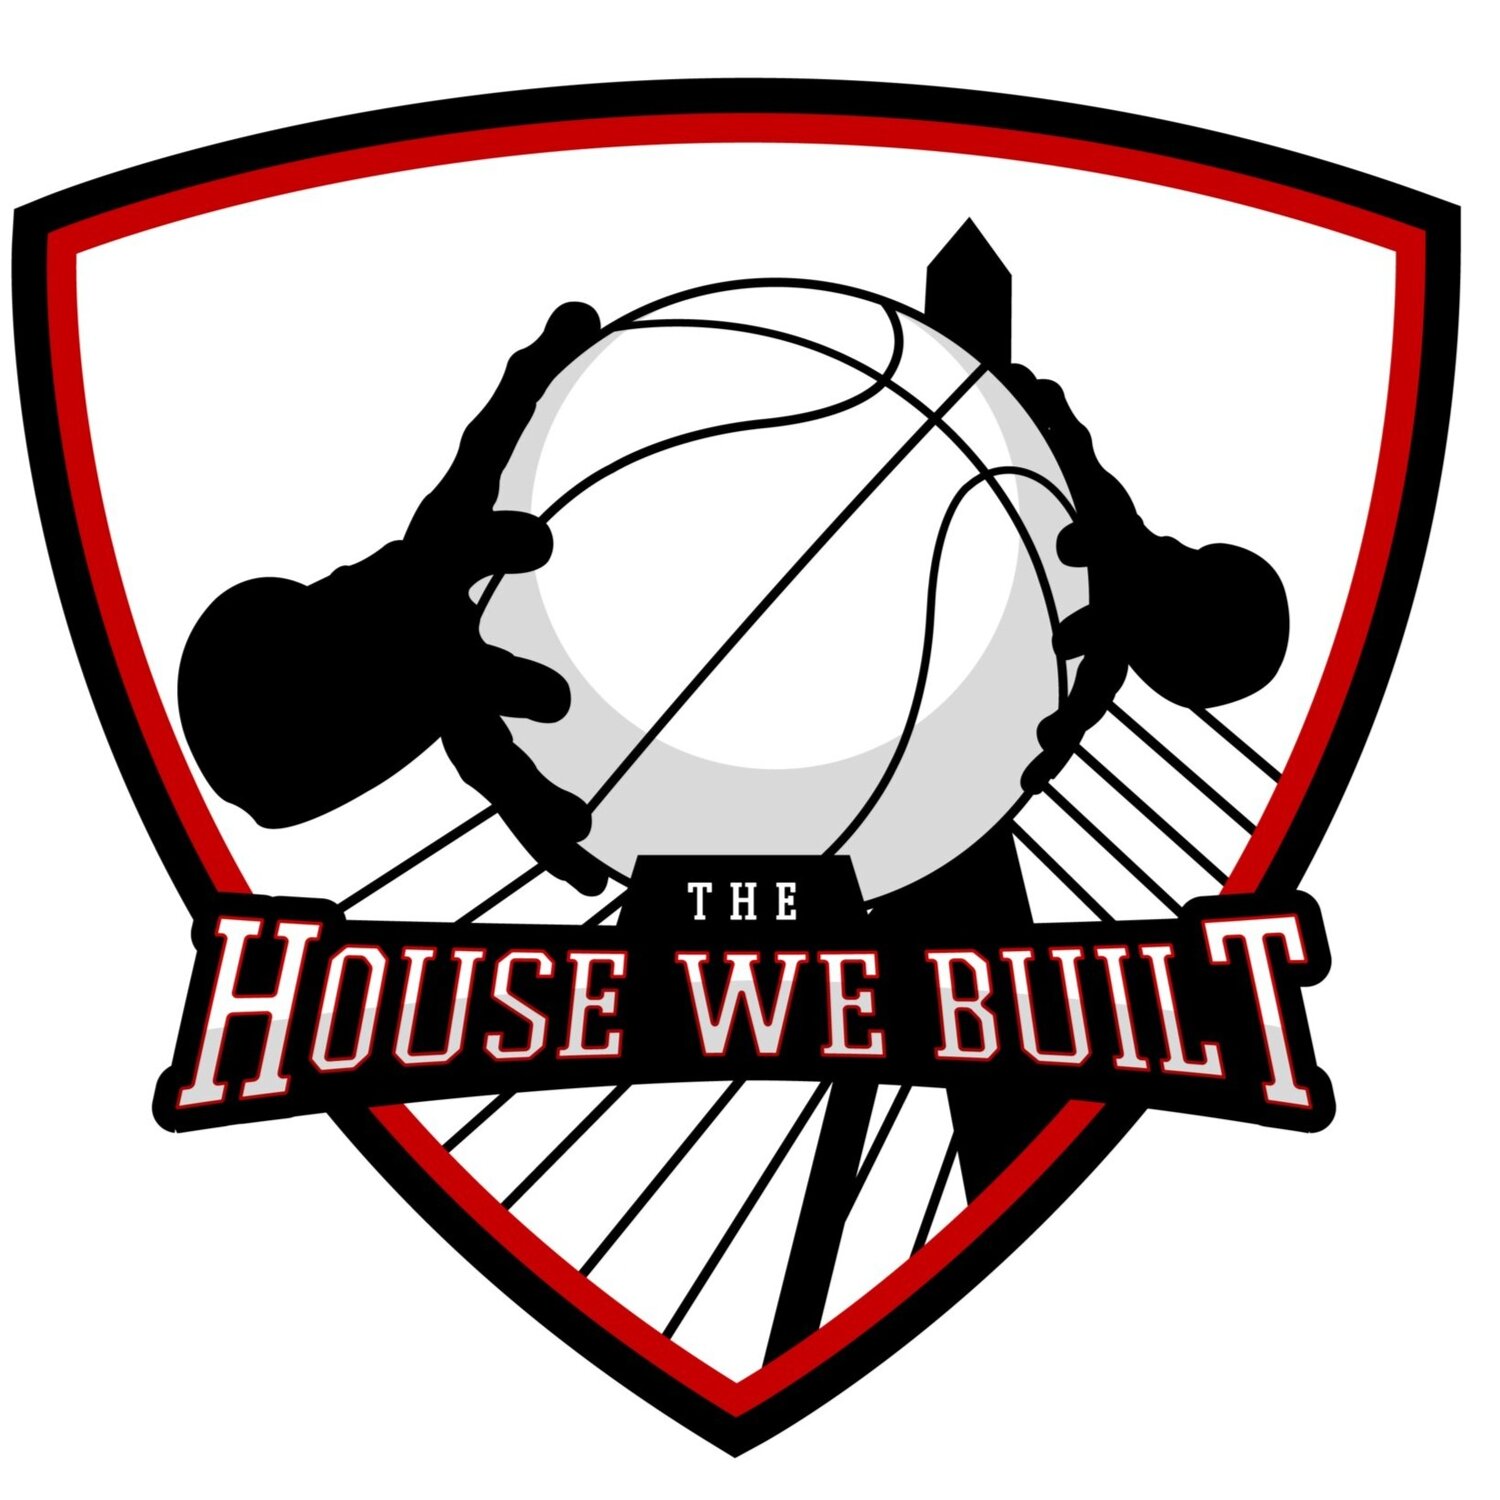 The House We Built